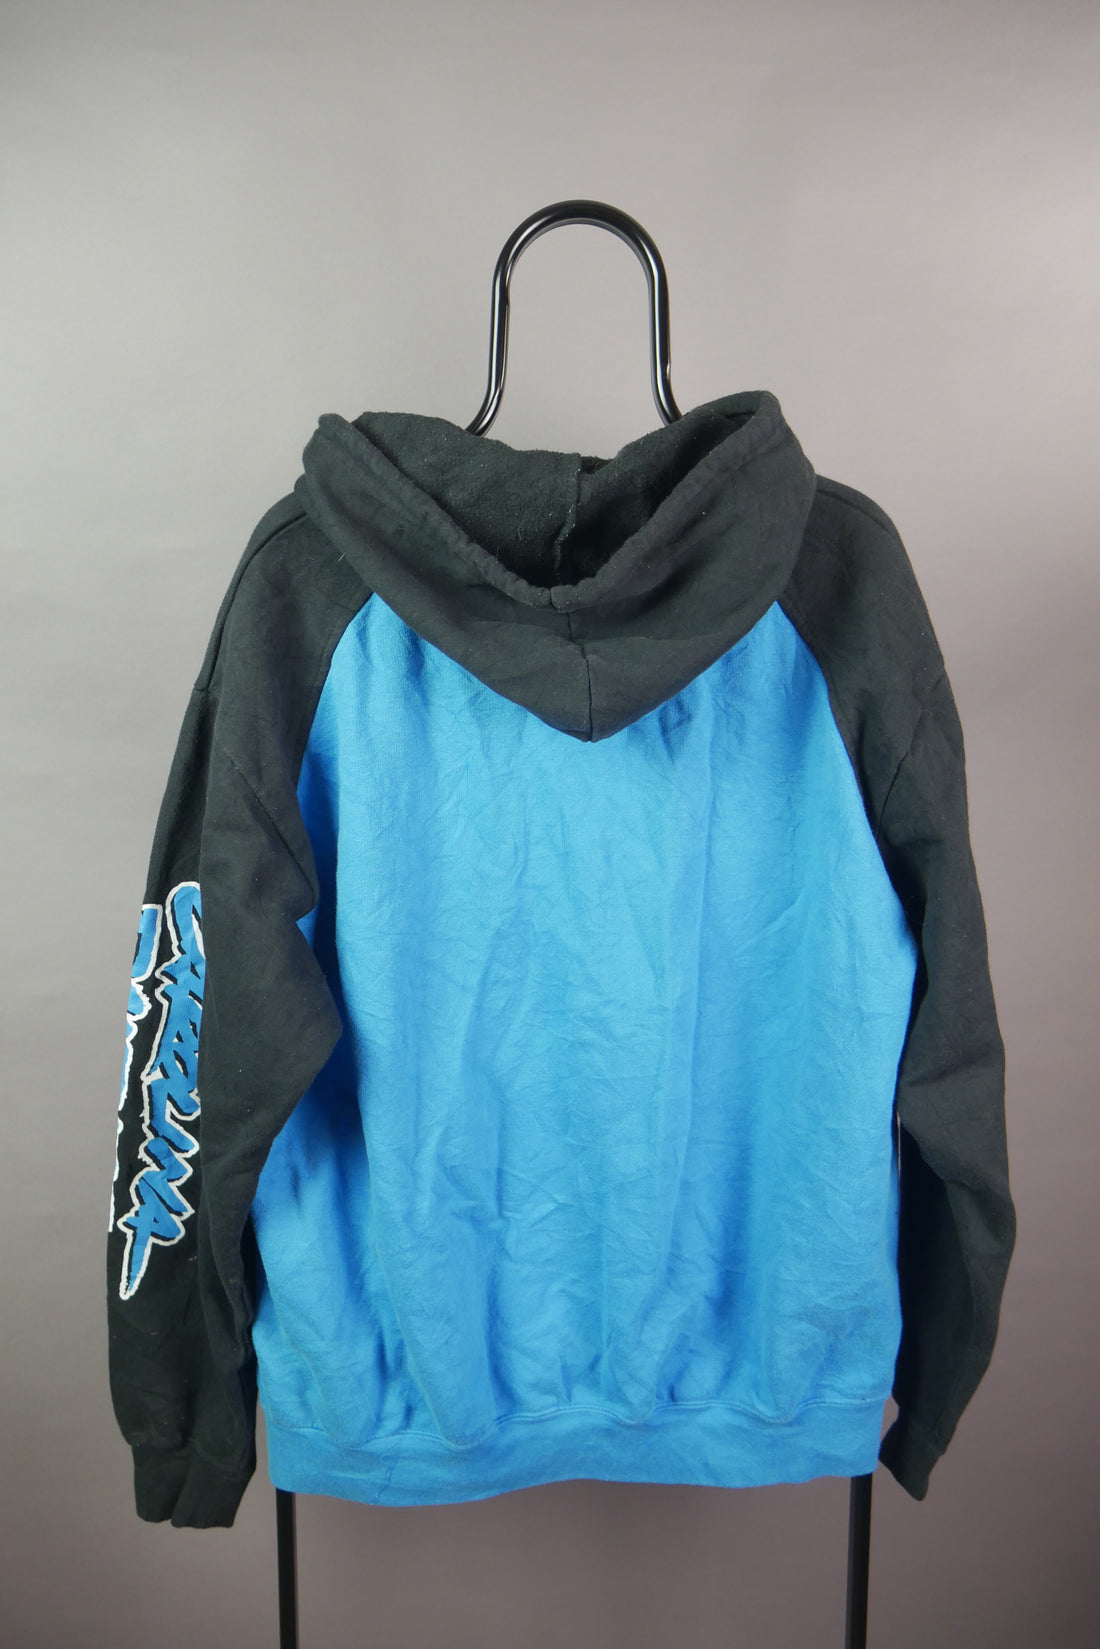 The NFL Graphic Hoodie (L)